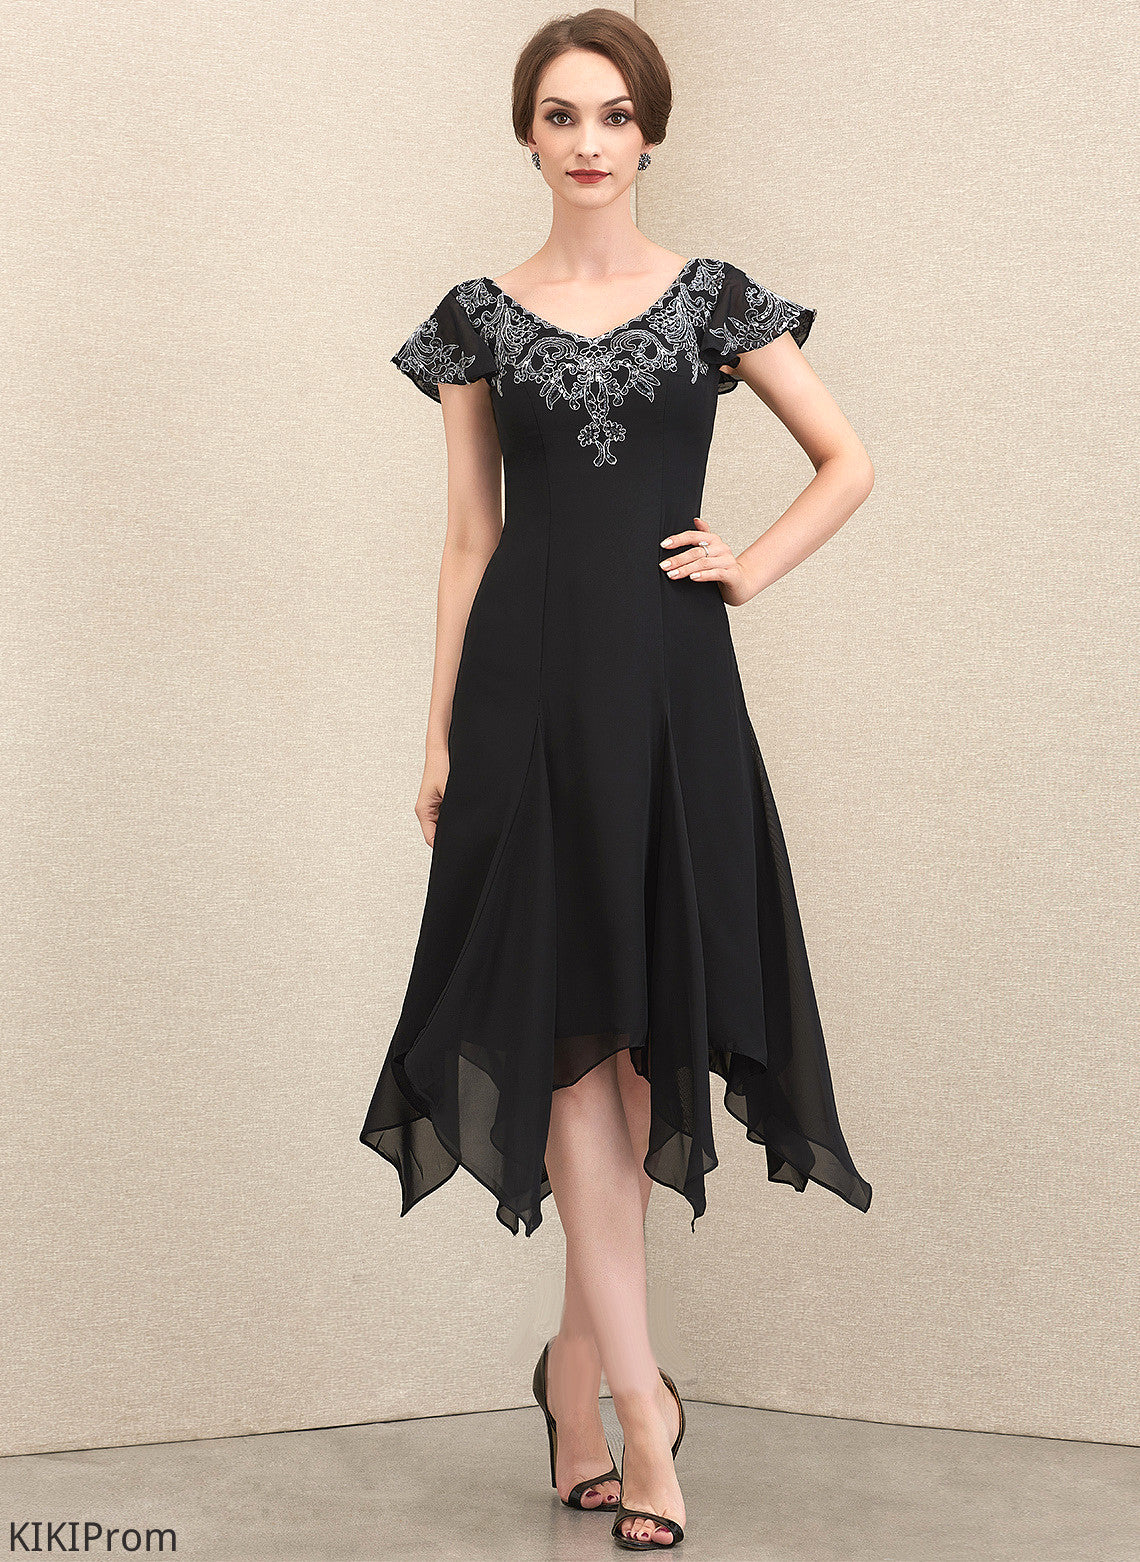 Bride Lace V-neck Chiffon Dress Mother With Mother of the Bride Dresses Kendra A-Line Sequins of Tea-Length the